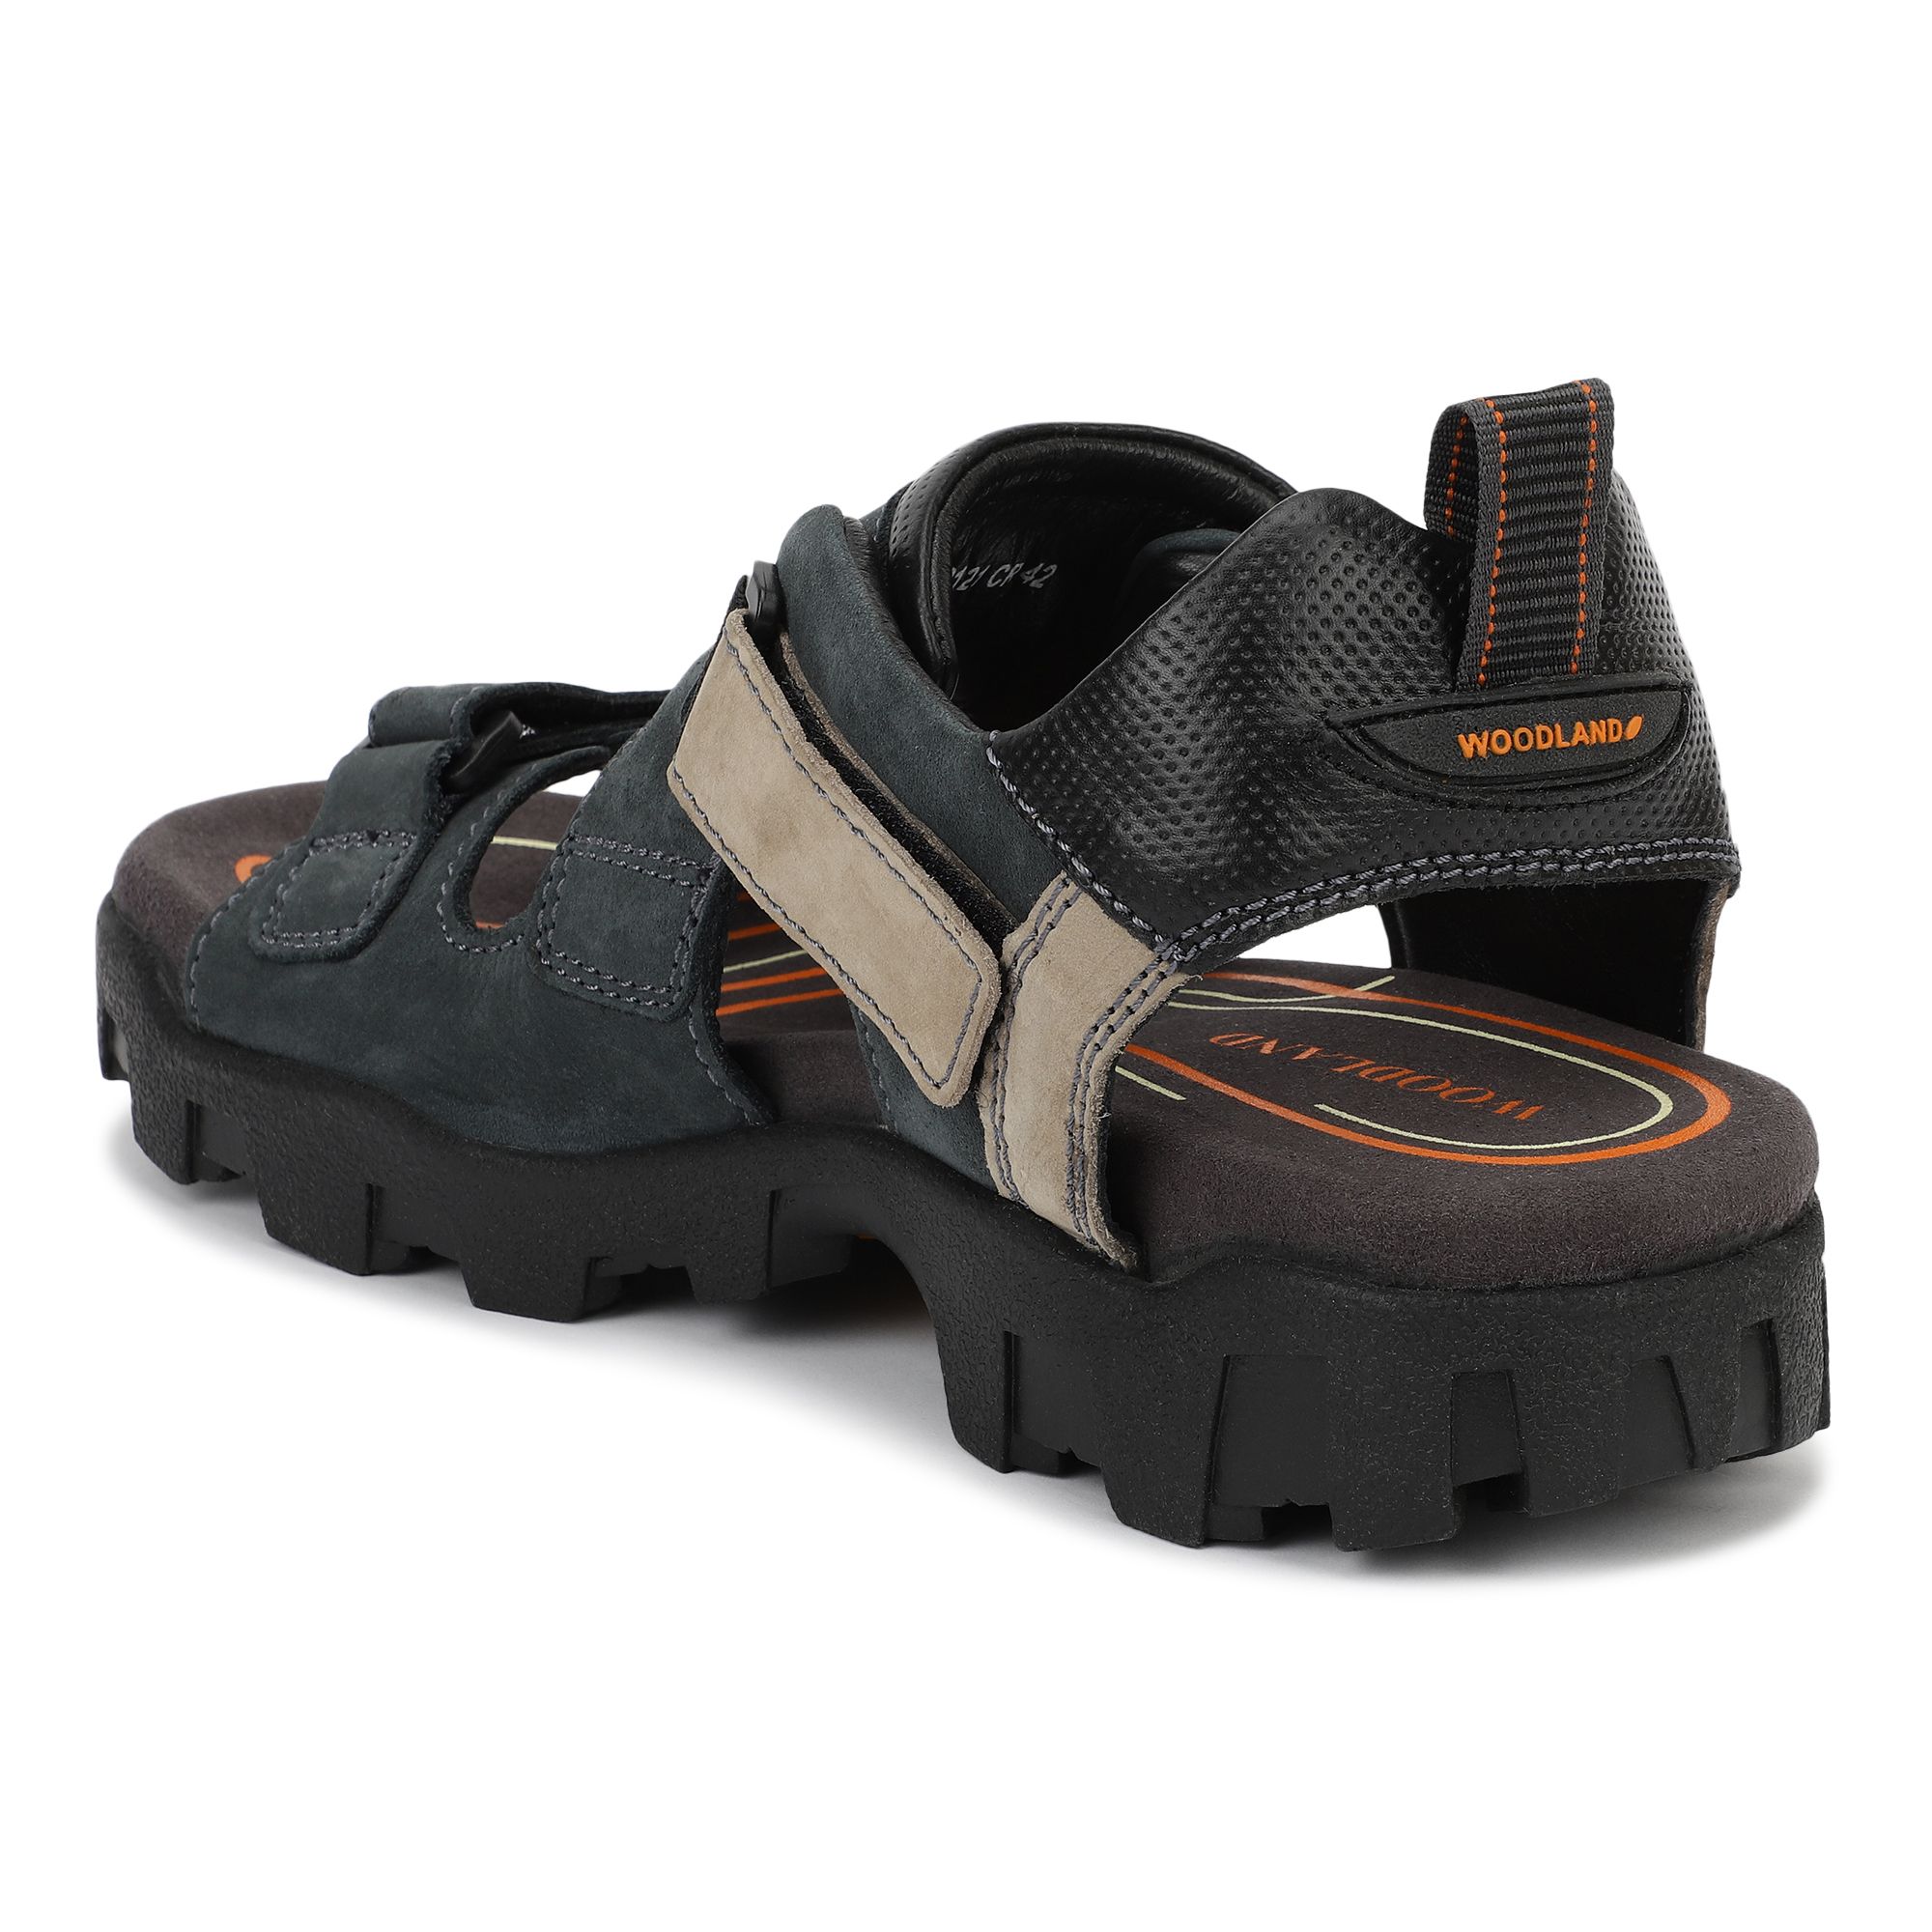 Summer Comfortable And High Design Trendy Looking Men's Brown Casual Sandal  at Best Price in Jalalabad | Pvc Footwear